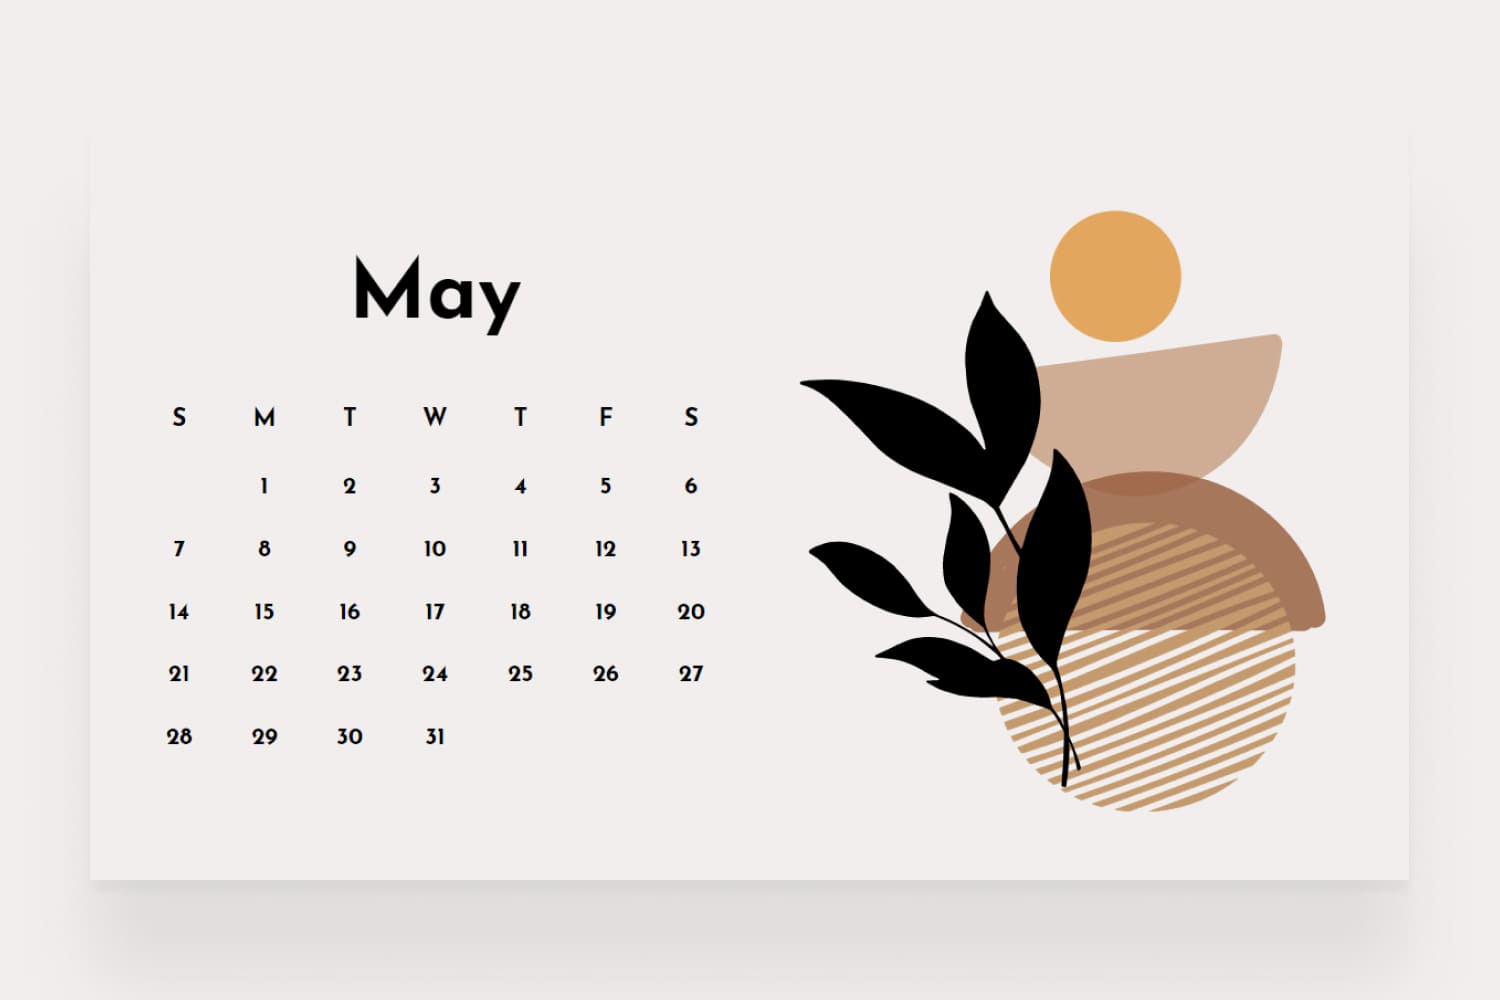 May calendar with a beige color scheme, decorative illustrations of flowers, plants, and simple typography.